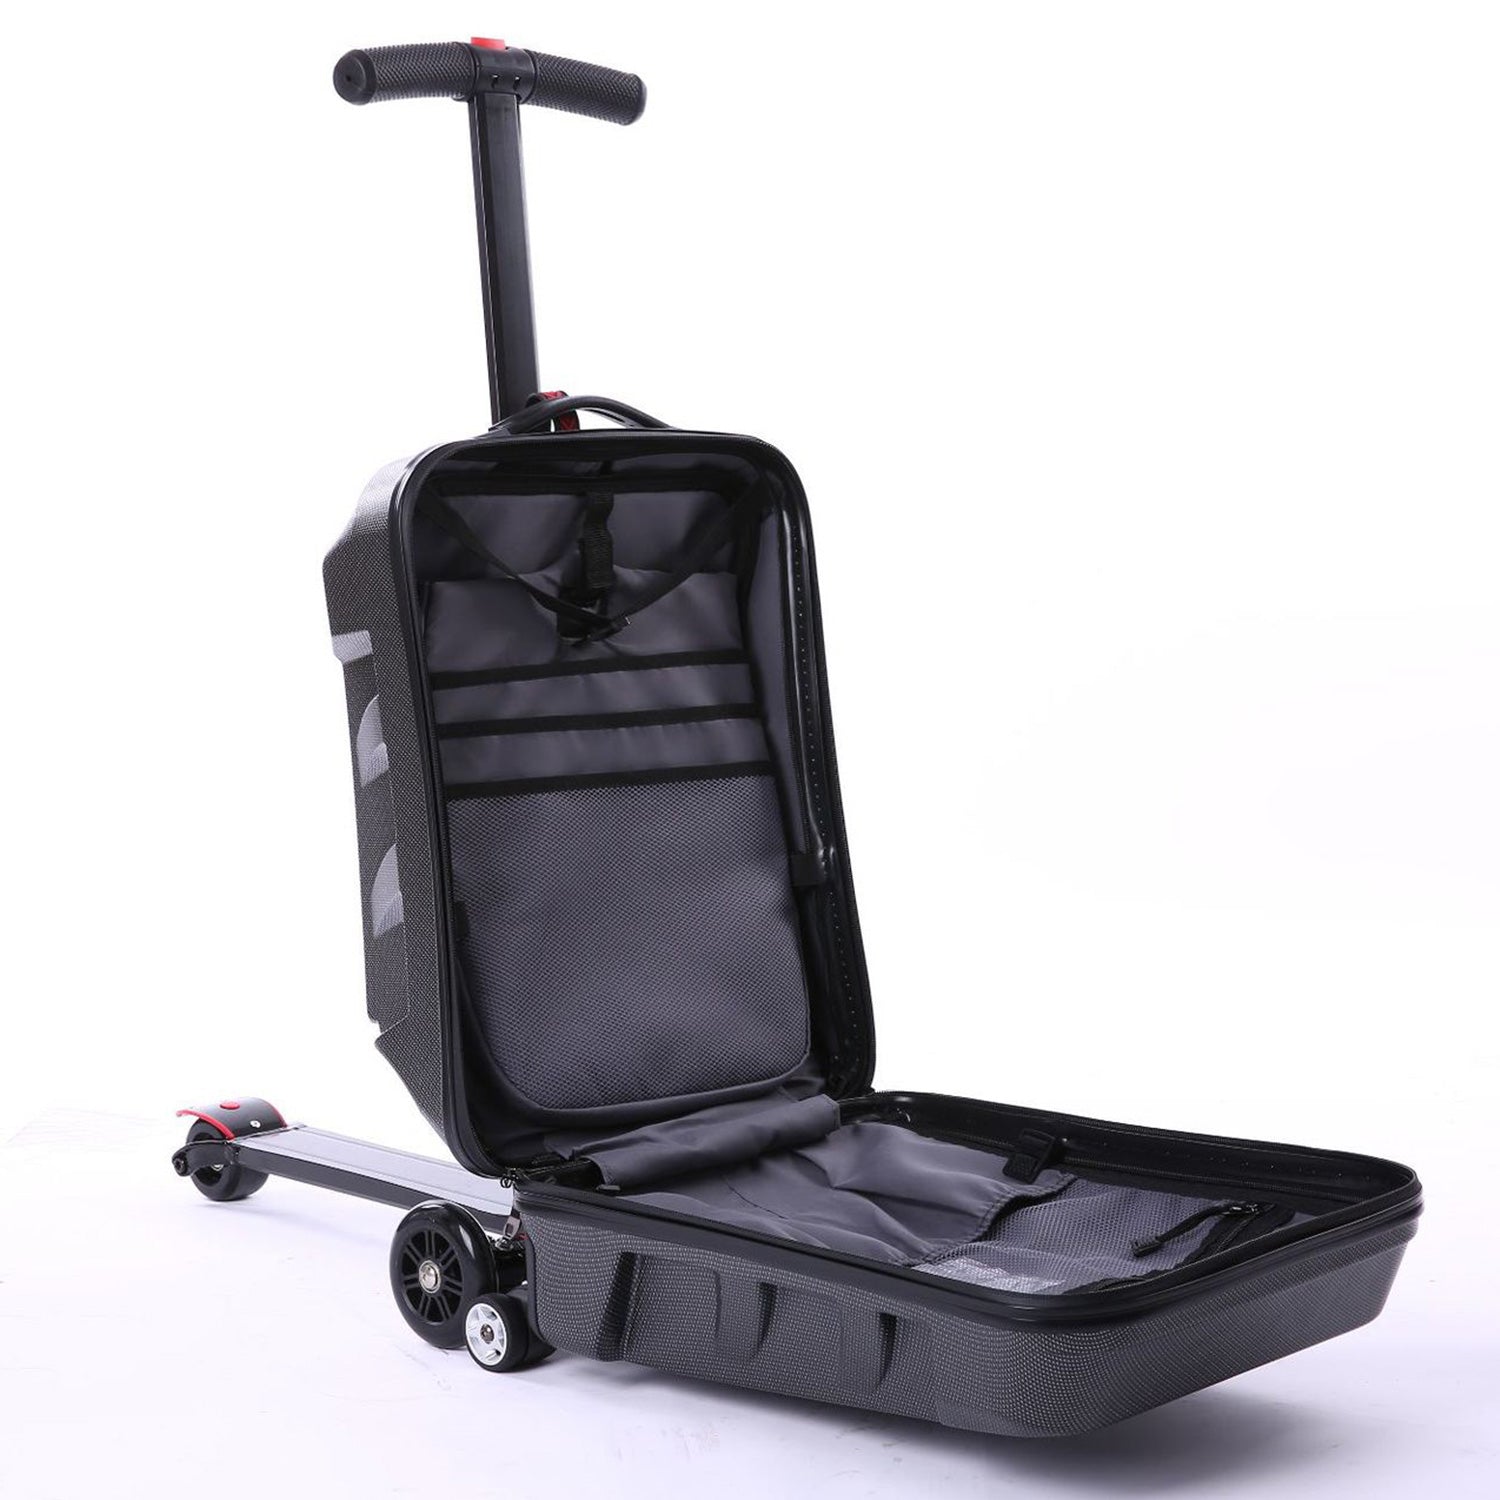 Iubest-The E-Scooter Suitcase Brings You Anywhere! | Indiegogo